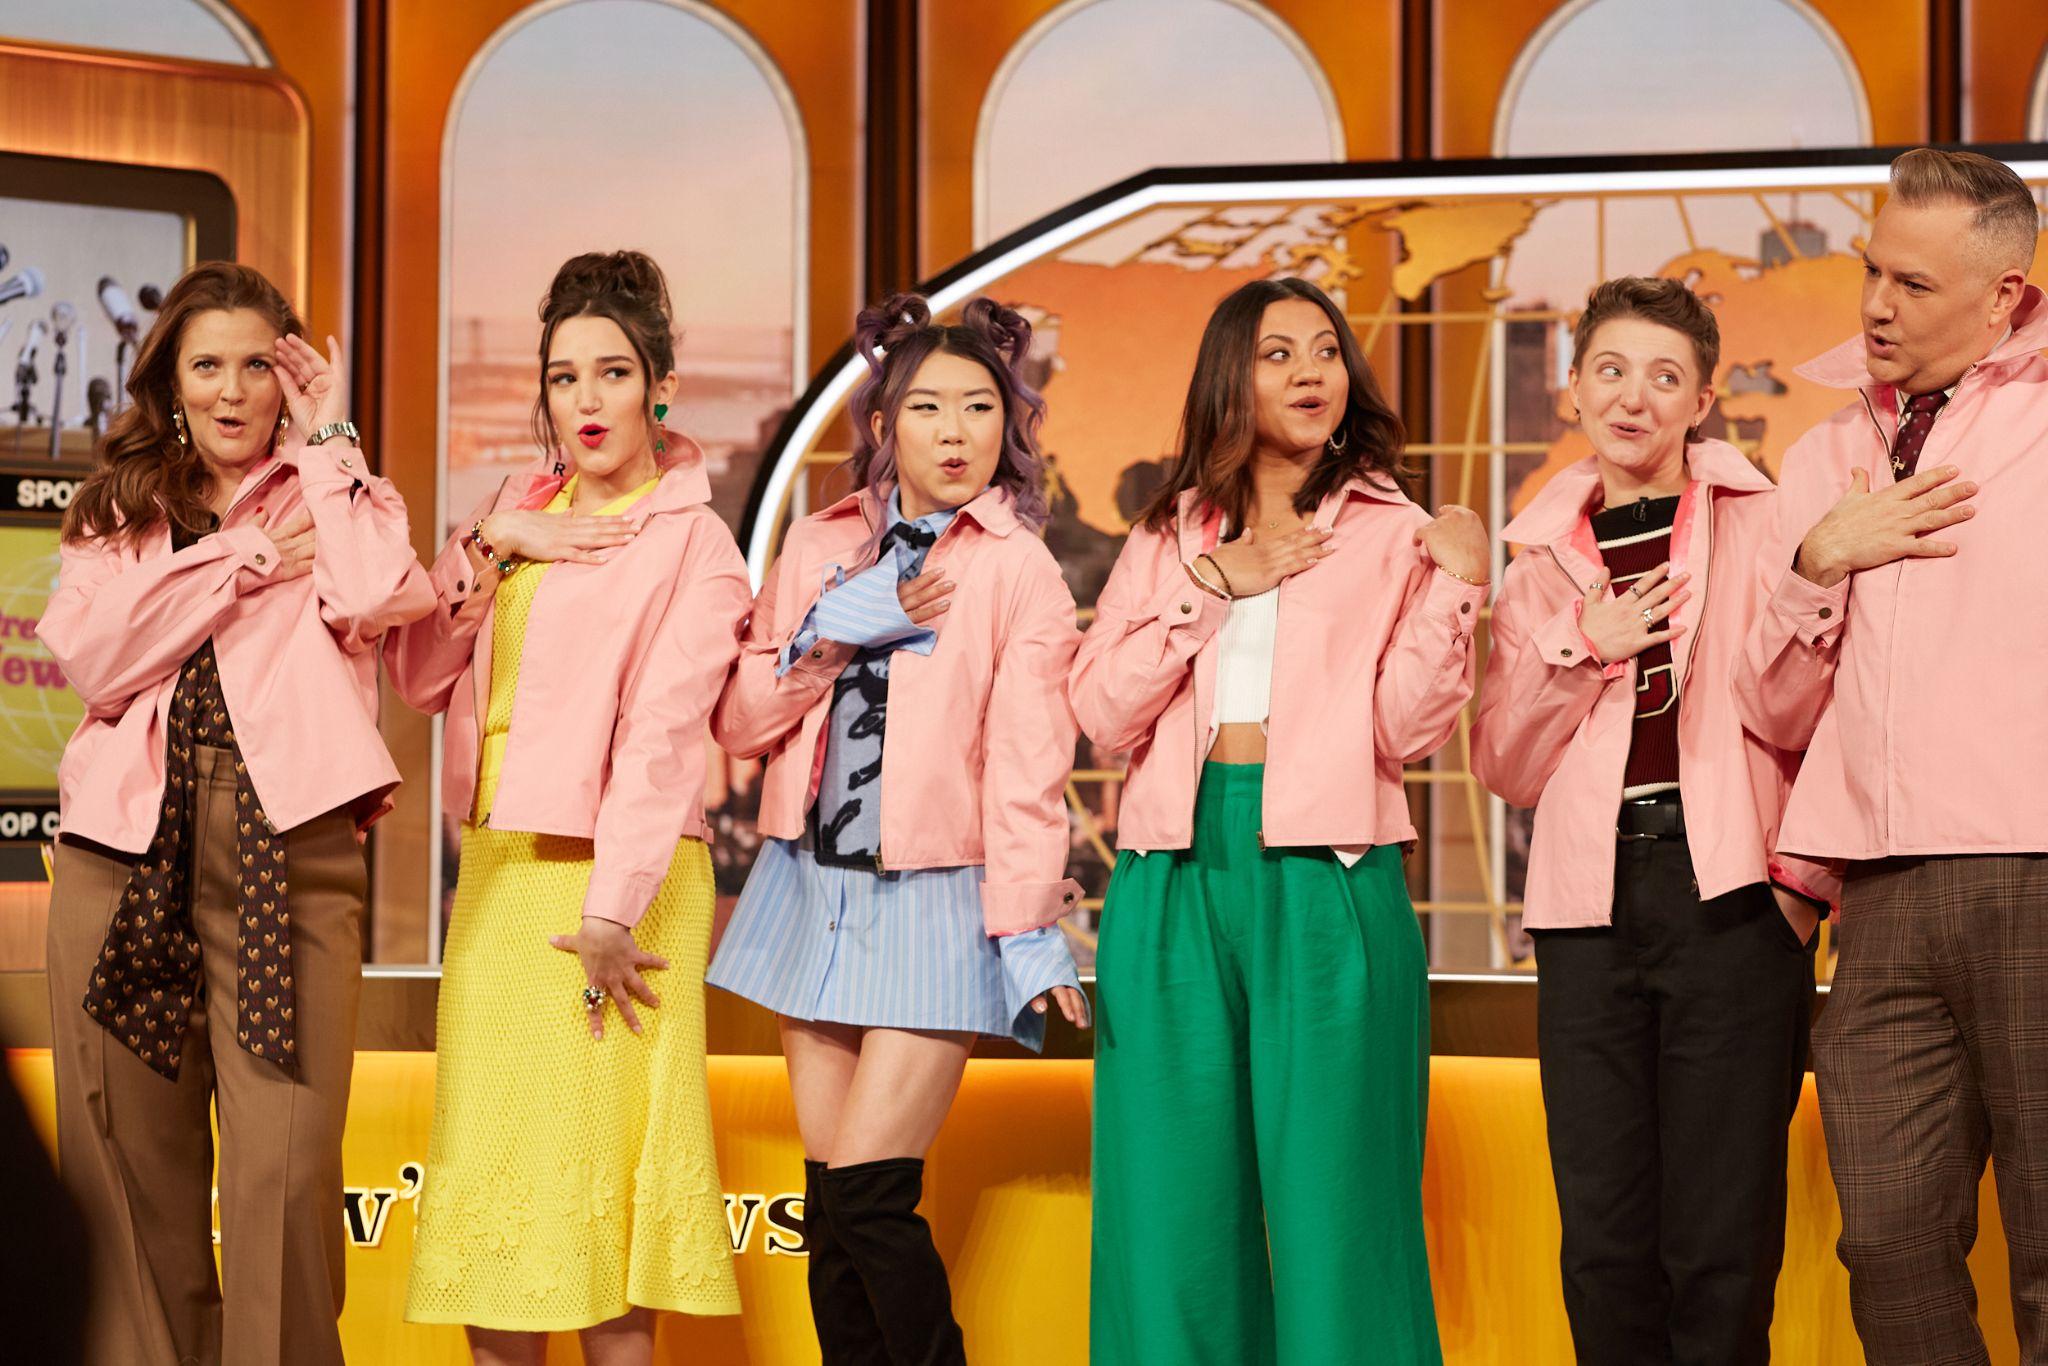 Grease' Prequel Series 'Rise of the Pink Ladies' Is a Go at Paramount+